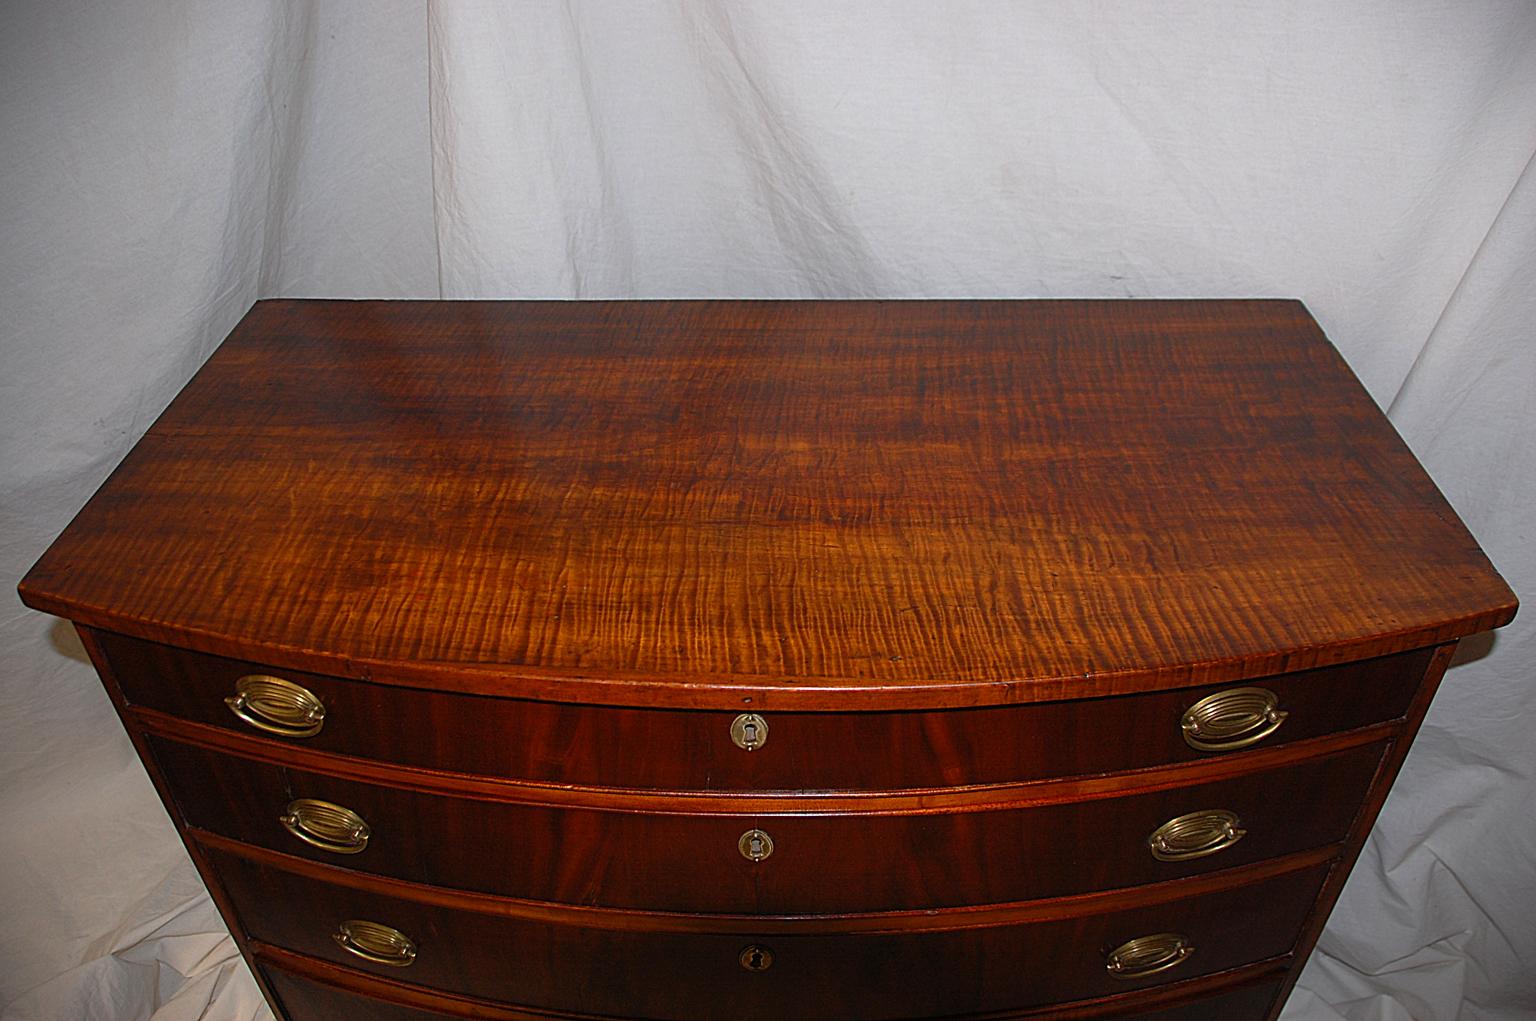 American Federal Period 18th century Hepplewhite bowfront chest of four graduated drawers. This chest has a glorious tiger maple top, maple carcass and matched mahogany drawer fronts. This combination of timber is not unusual even in New England